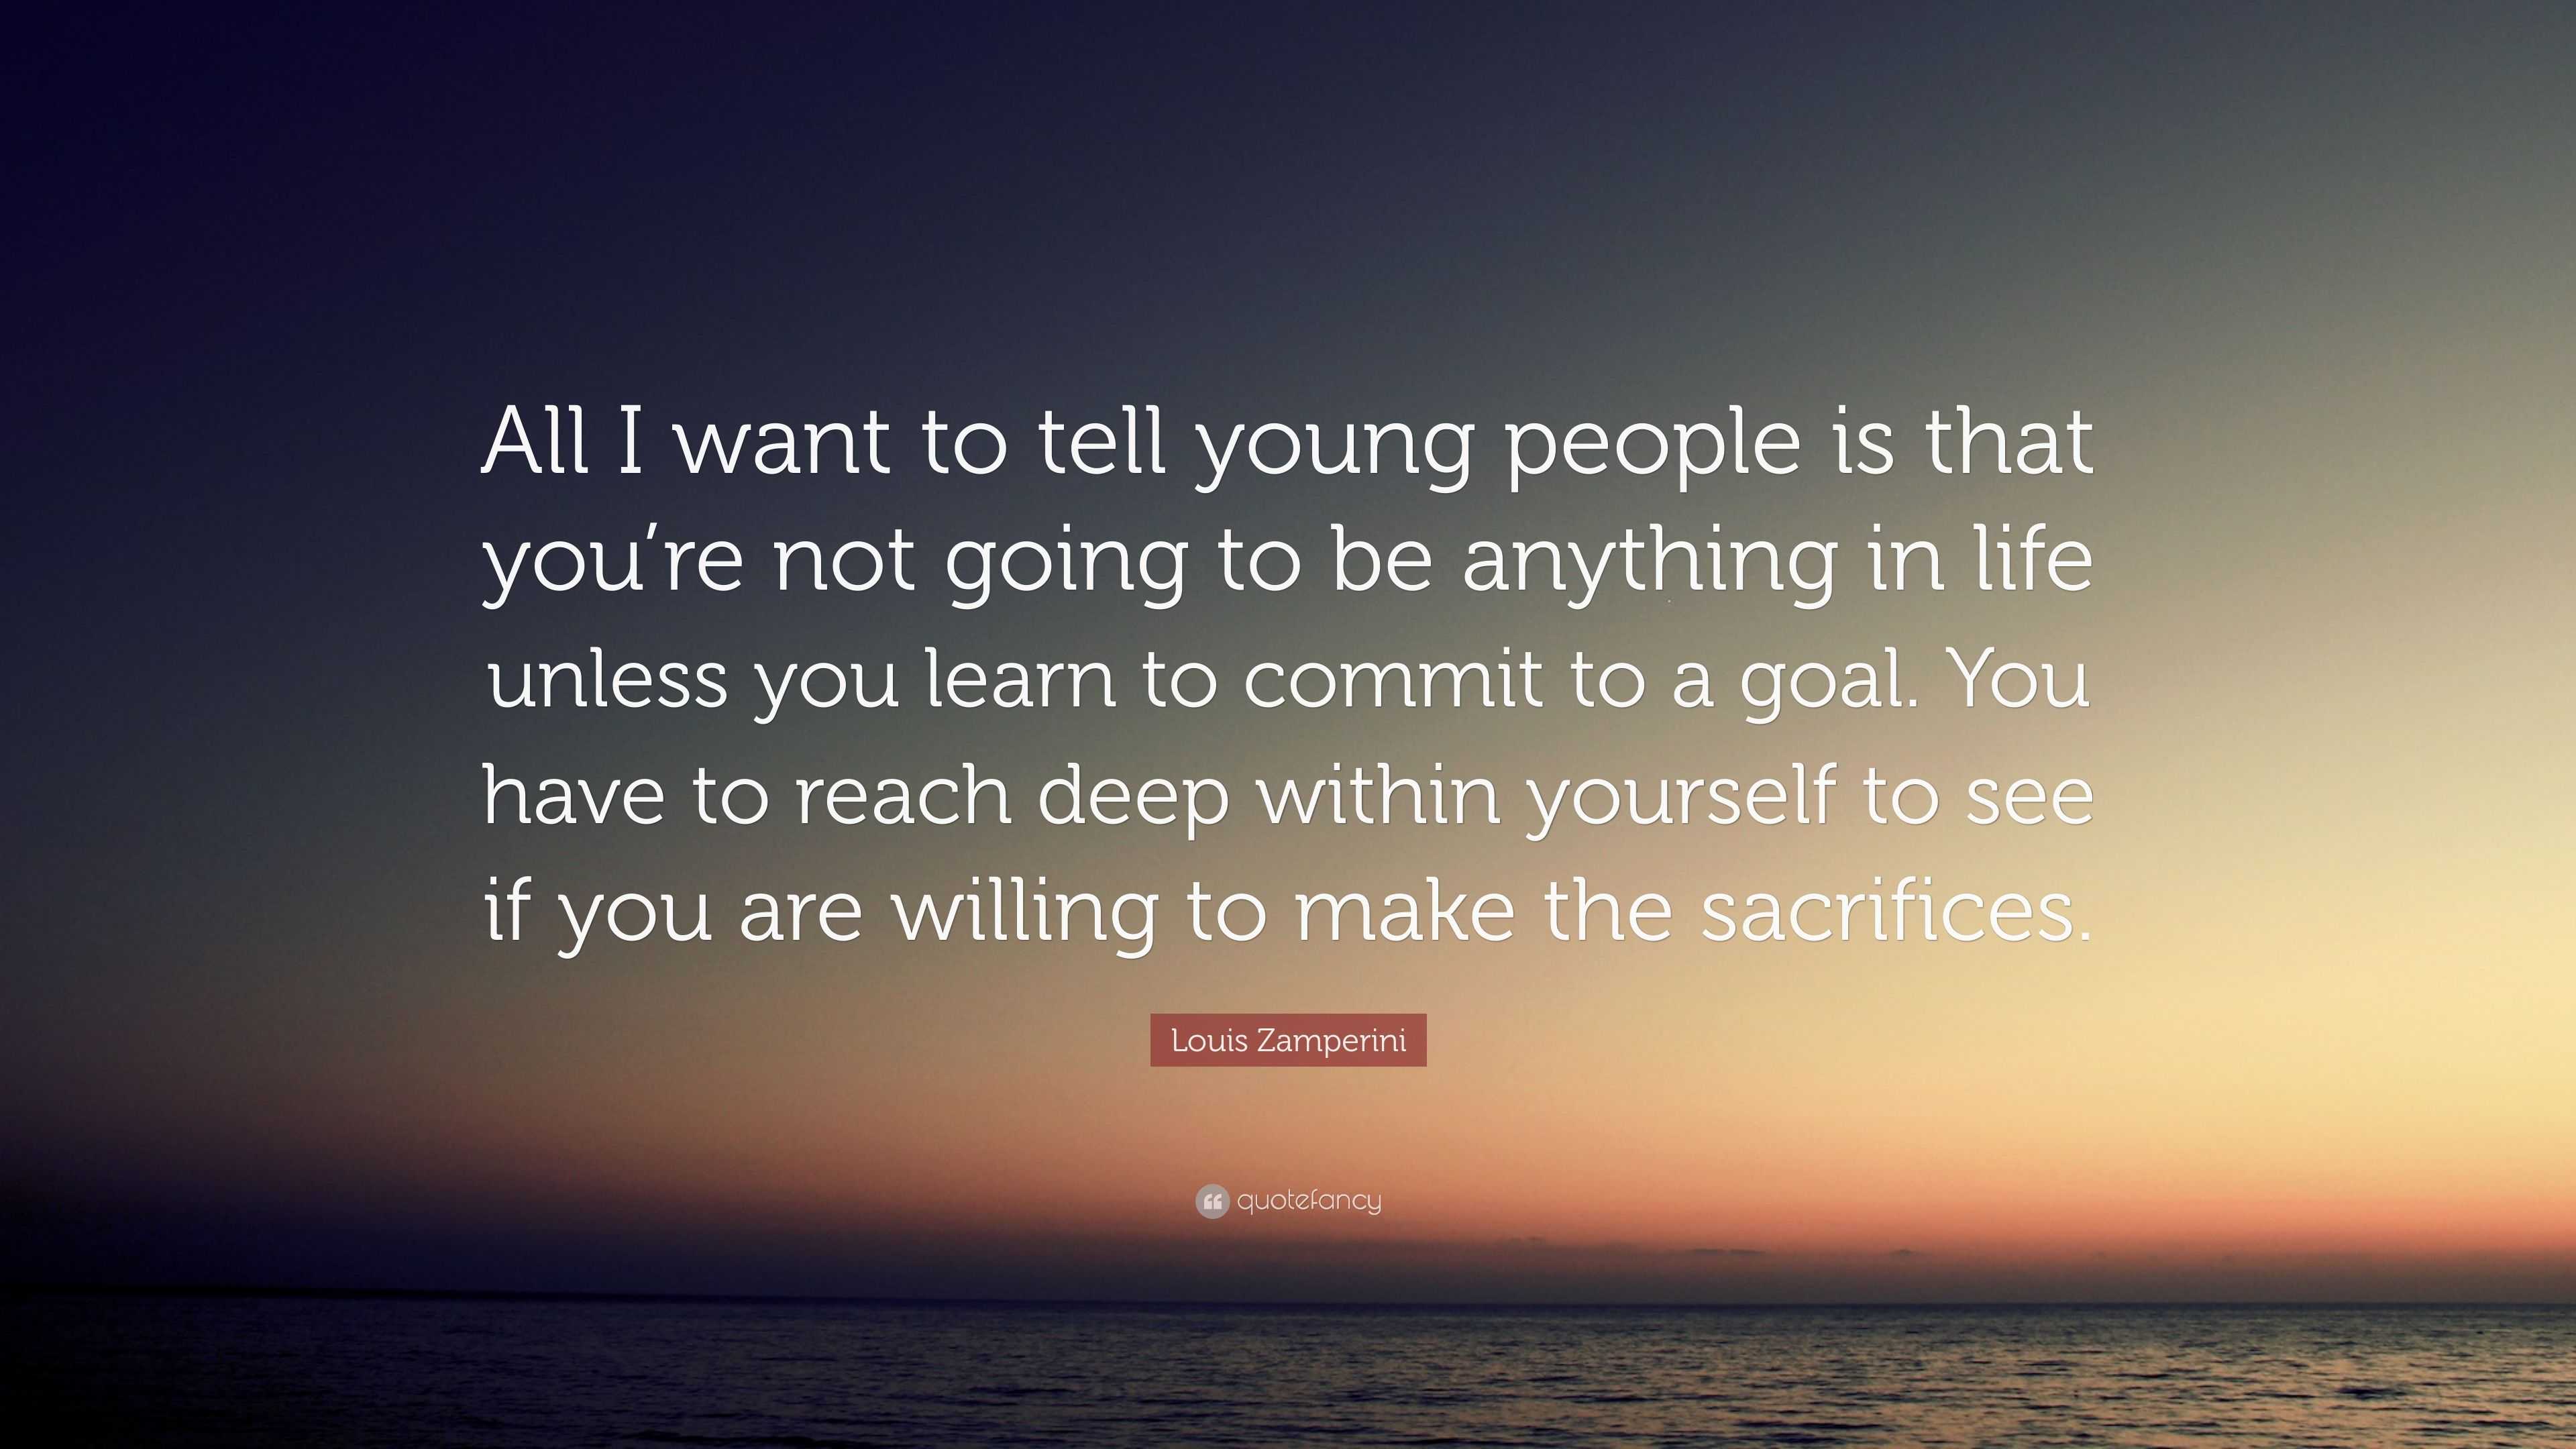 Louis Zamperini Quote “All I want to tell young people is that you